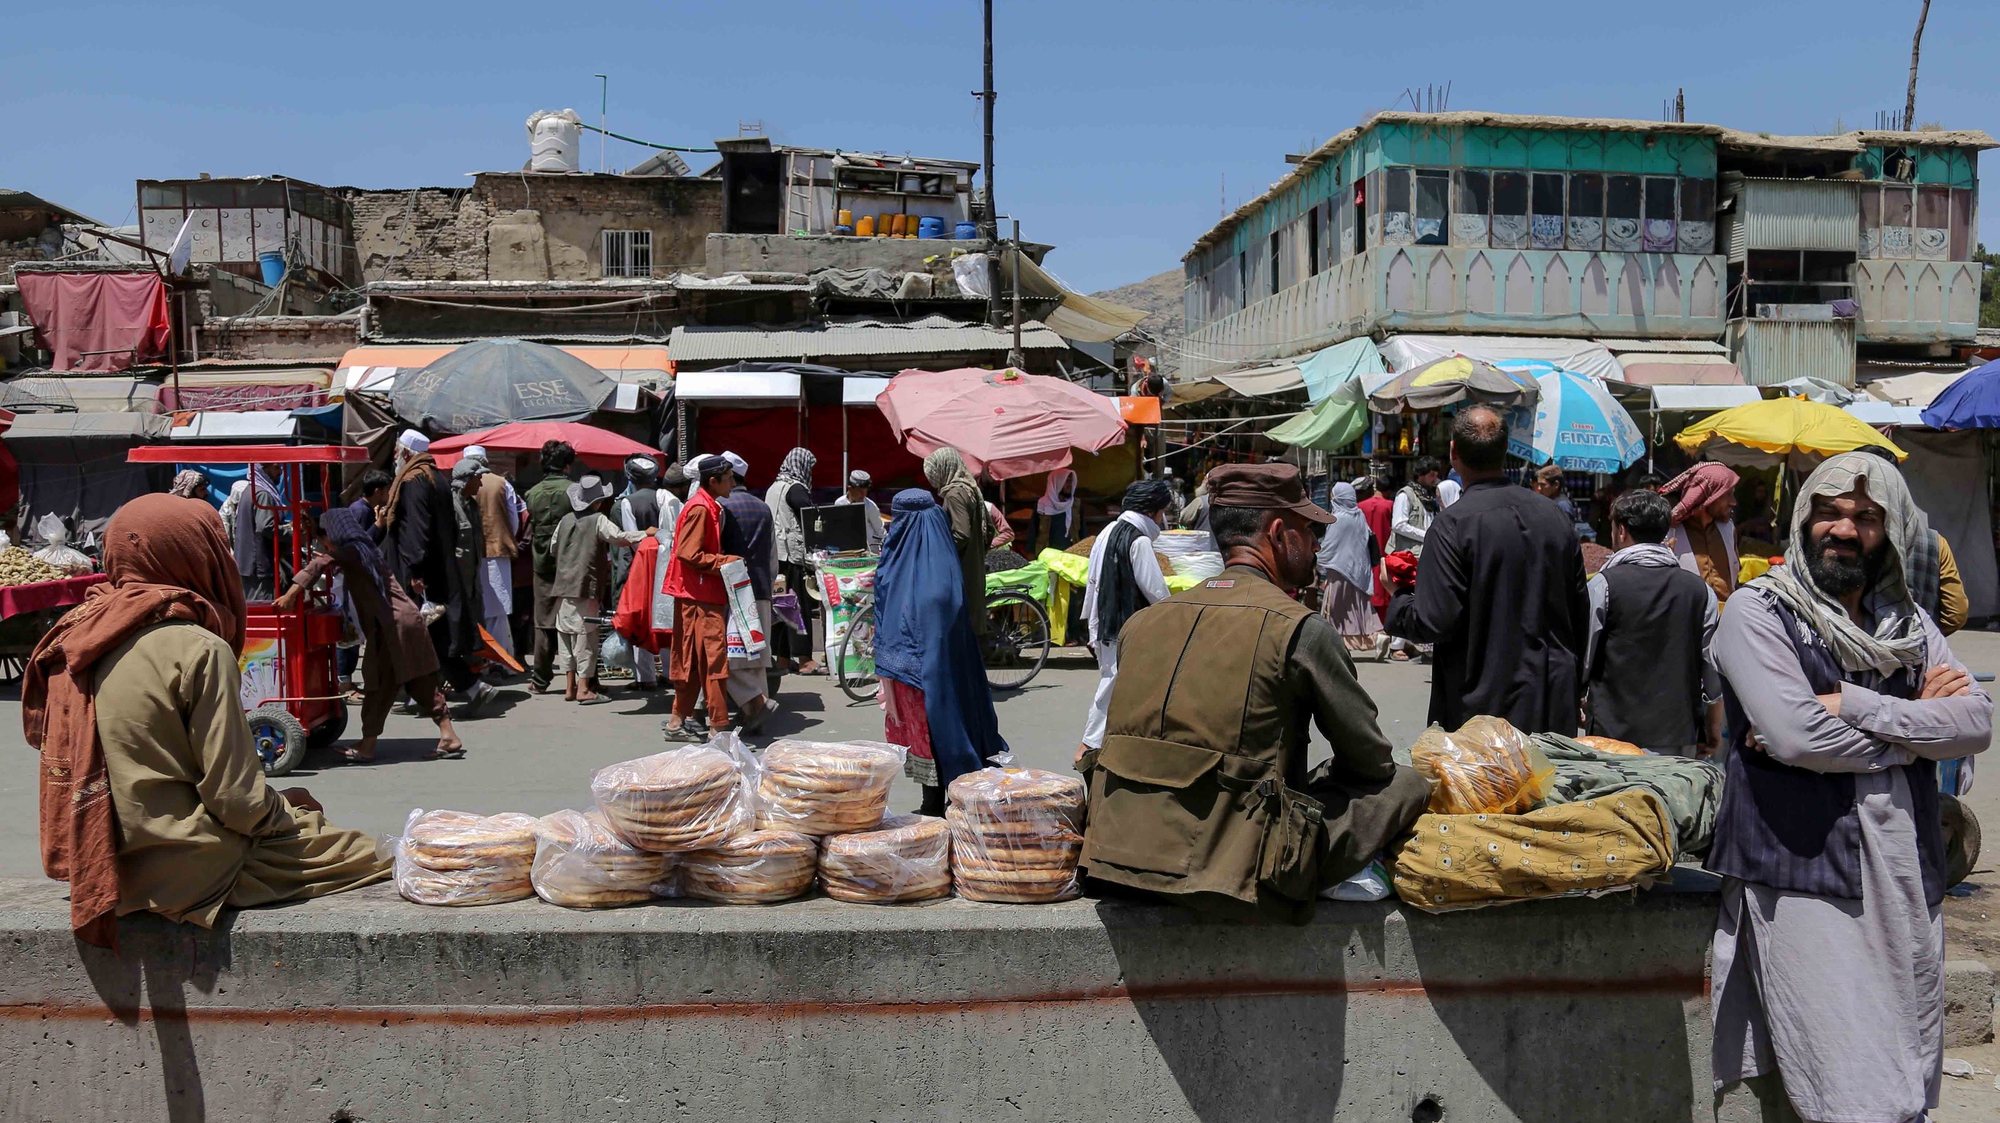 epa10675691 Afghan vendors sell bread on a roadside on the eve of the World Food Safety Day in Kabul, Afghanistan, 06 June 2023. According to report â€˜The Hunger Hotspotsâ€™ released on 29 May by the United Nations, 22 countries will experience an increase in acute food insecurity over the next six months. Afghanistan, Nigeria, Somalia, South Sudan, and Yemen are at the highest alert level, while Haiti, the Sahel, and Sudan are at the highest concern levels. Low to middle income countries will be driven further into crisis due to unusually high global food prices. Pakistan, the Central African Republic, Ethiopia, Kenya, the Democratic Republic of Congo, Syria, and Myanmar are also hotspots of very high concern. The UN has called for urgent humanitarian action to save lives and livelihoods and prevent starvation and death in hotspots where acute hunger is at a high risk of worsening from June to November 2023.  EPA/SAMIULLAH POPAL